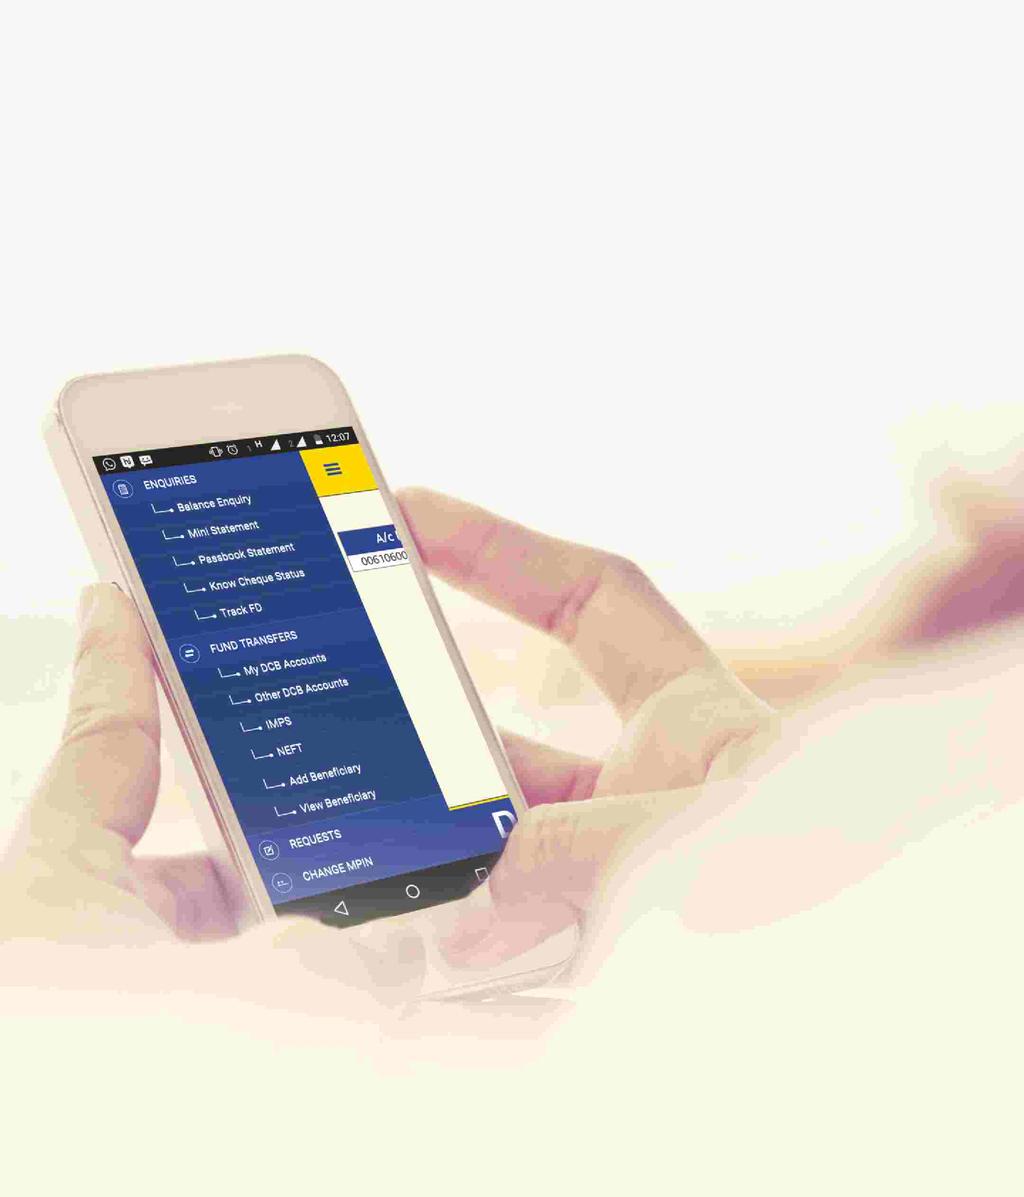 Banking anytime, anywhere. DCB On The Go App Instant Mobile Banking Download app now! Download using any one of the following options: Visit: http://dcbapp.